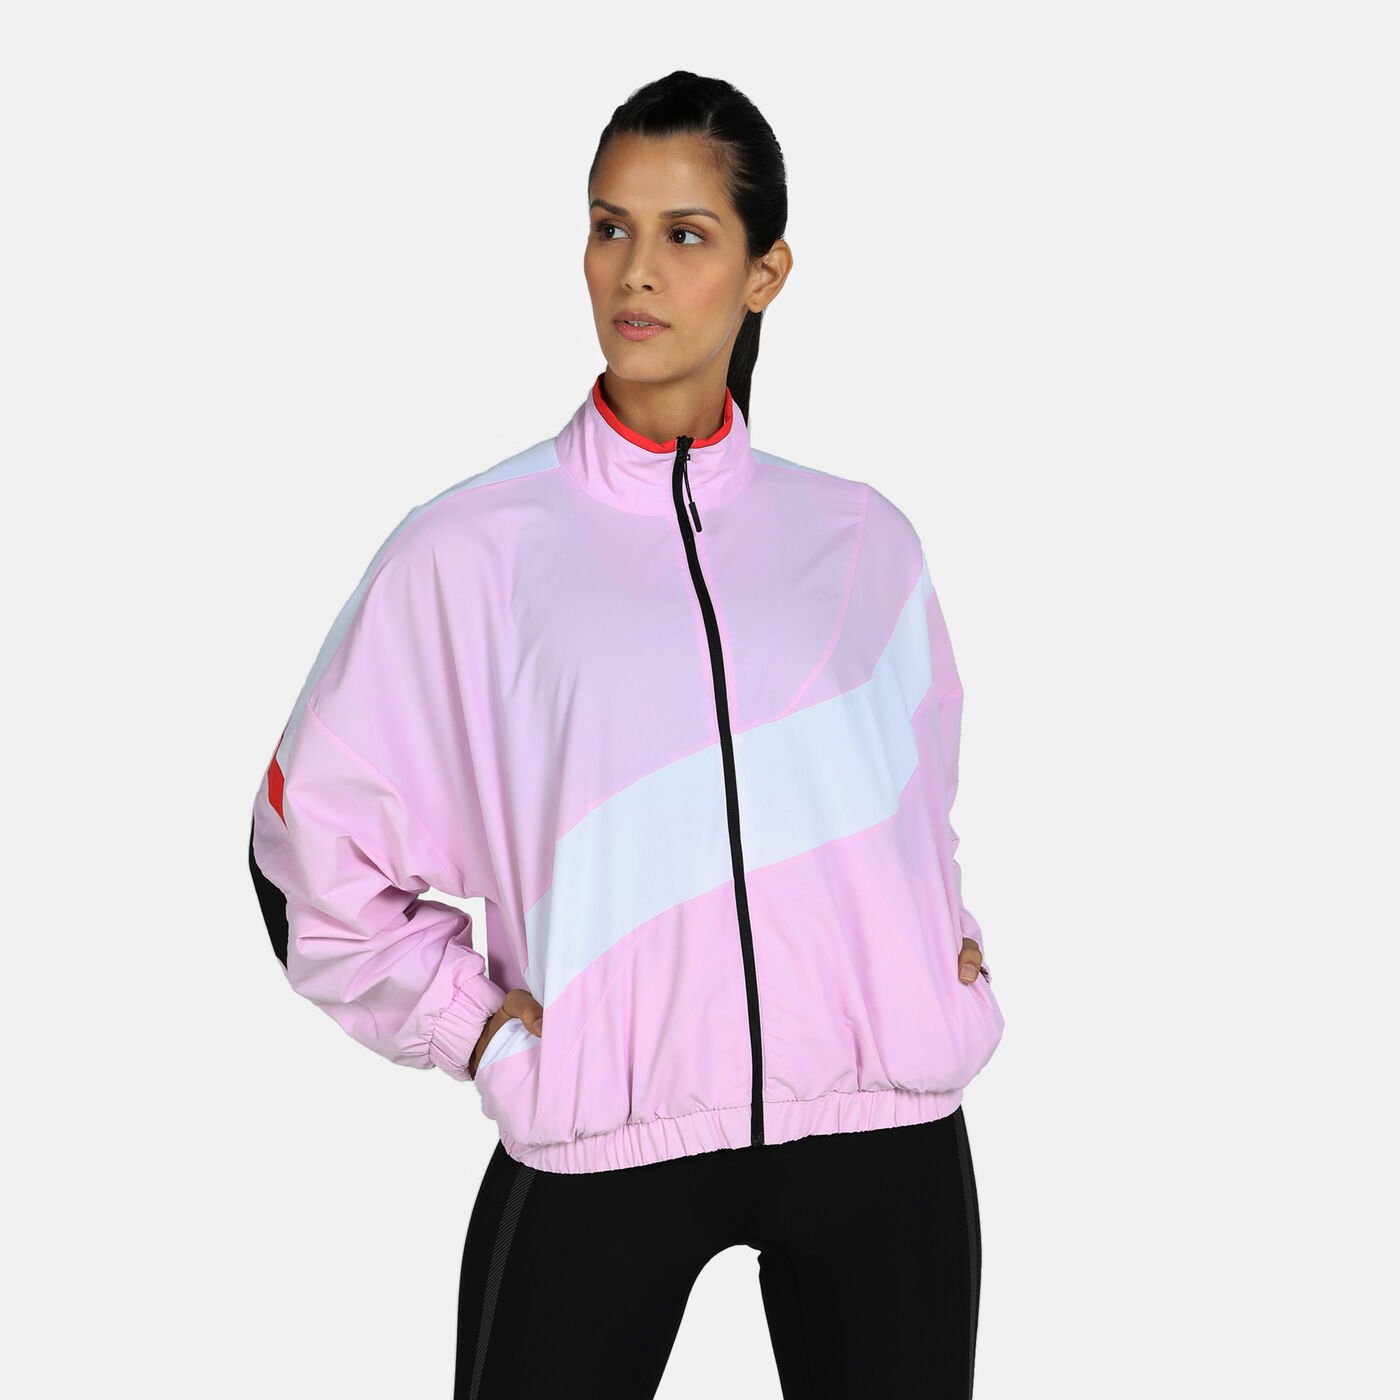 Women's Workout Ready Meet You There Jacket